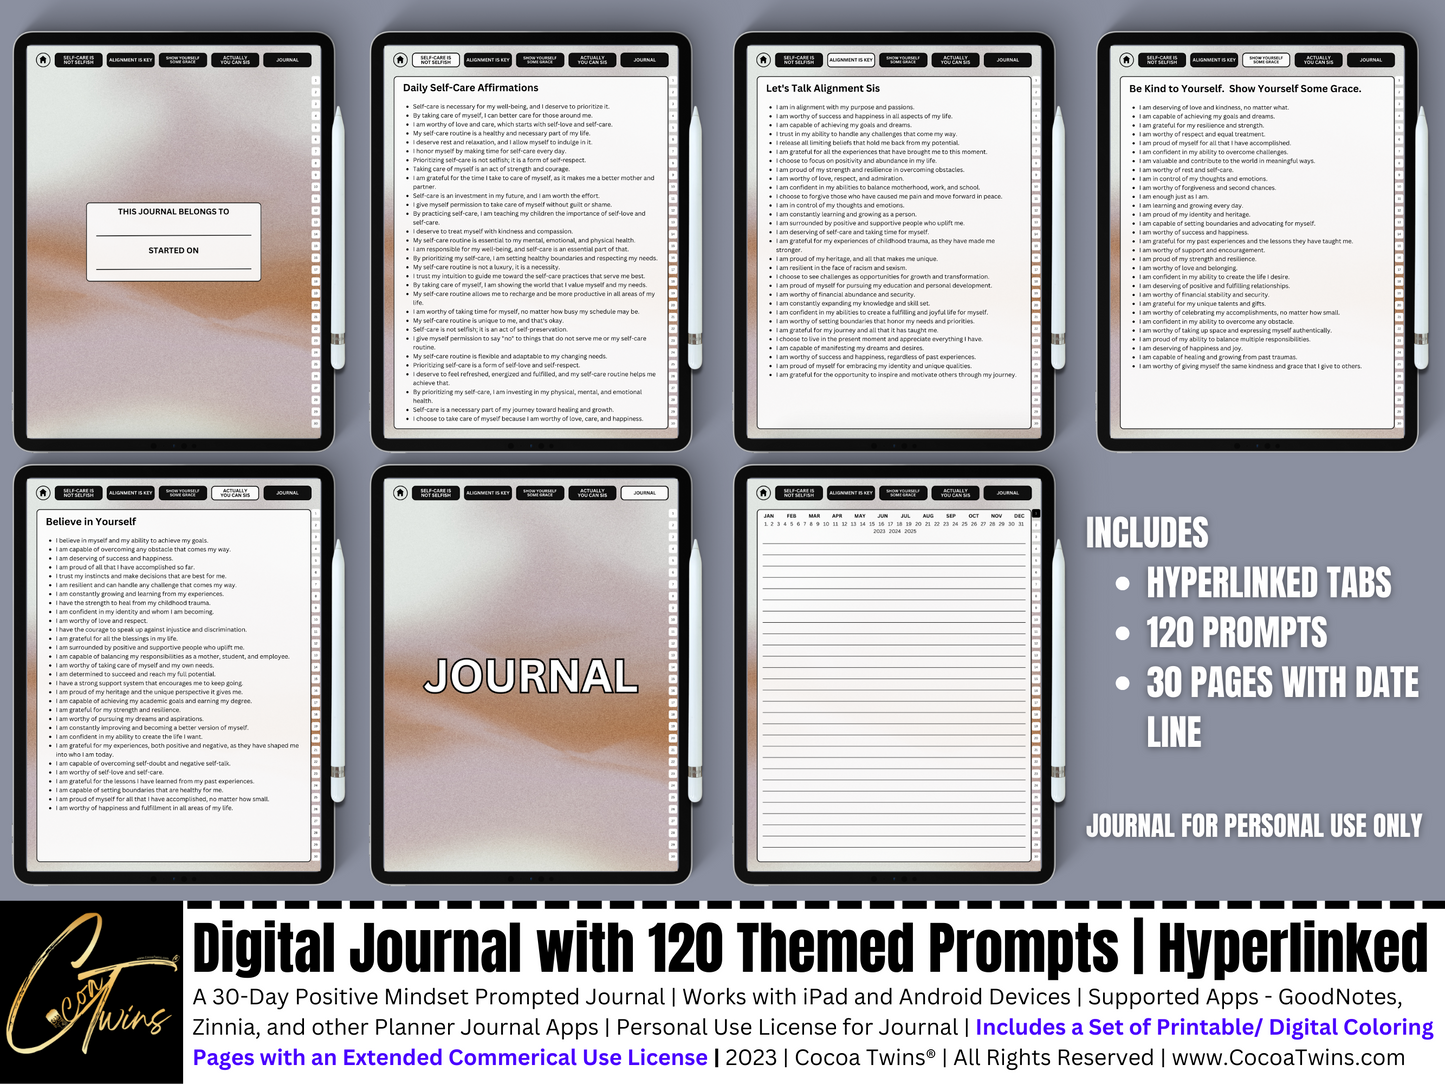 Mindset Matters - Alignment is Key | A Hyperlinked Digital Journal with 120 Themed Prompts